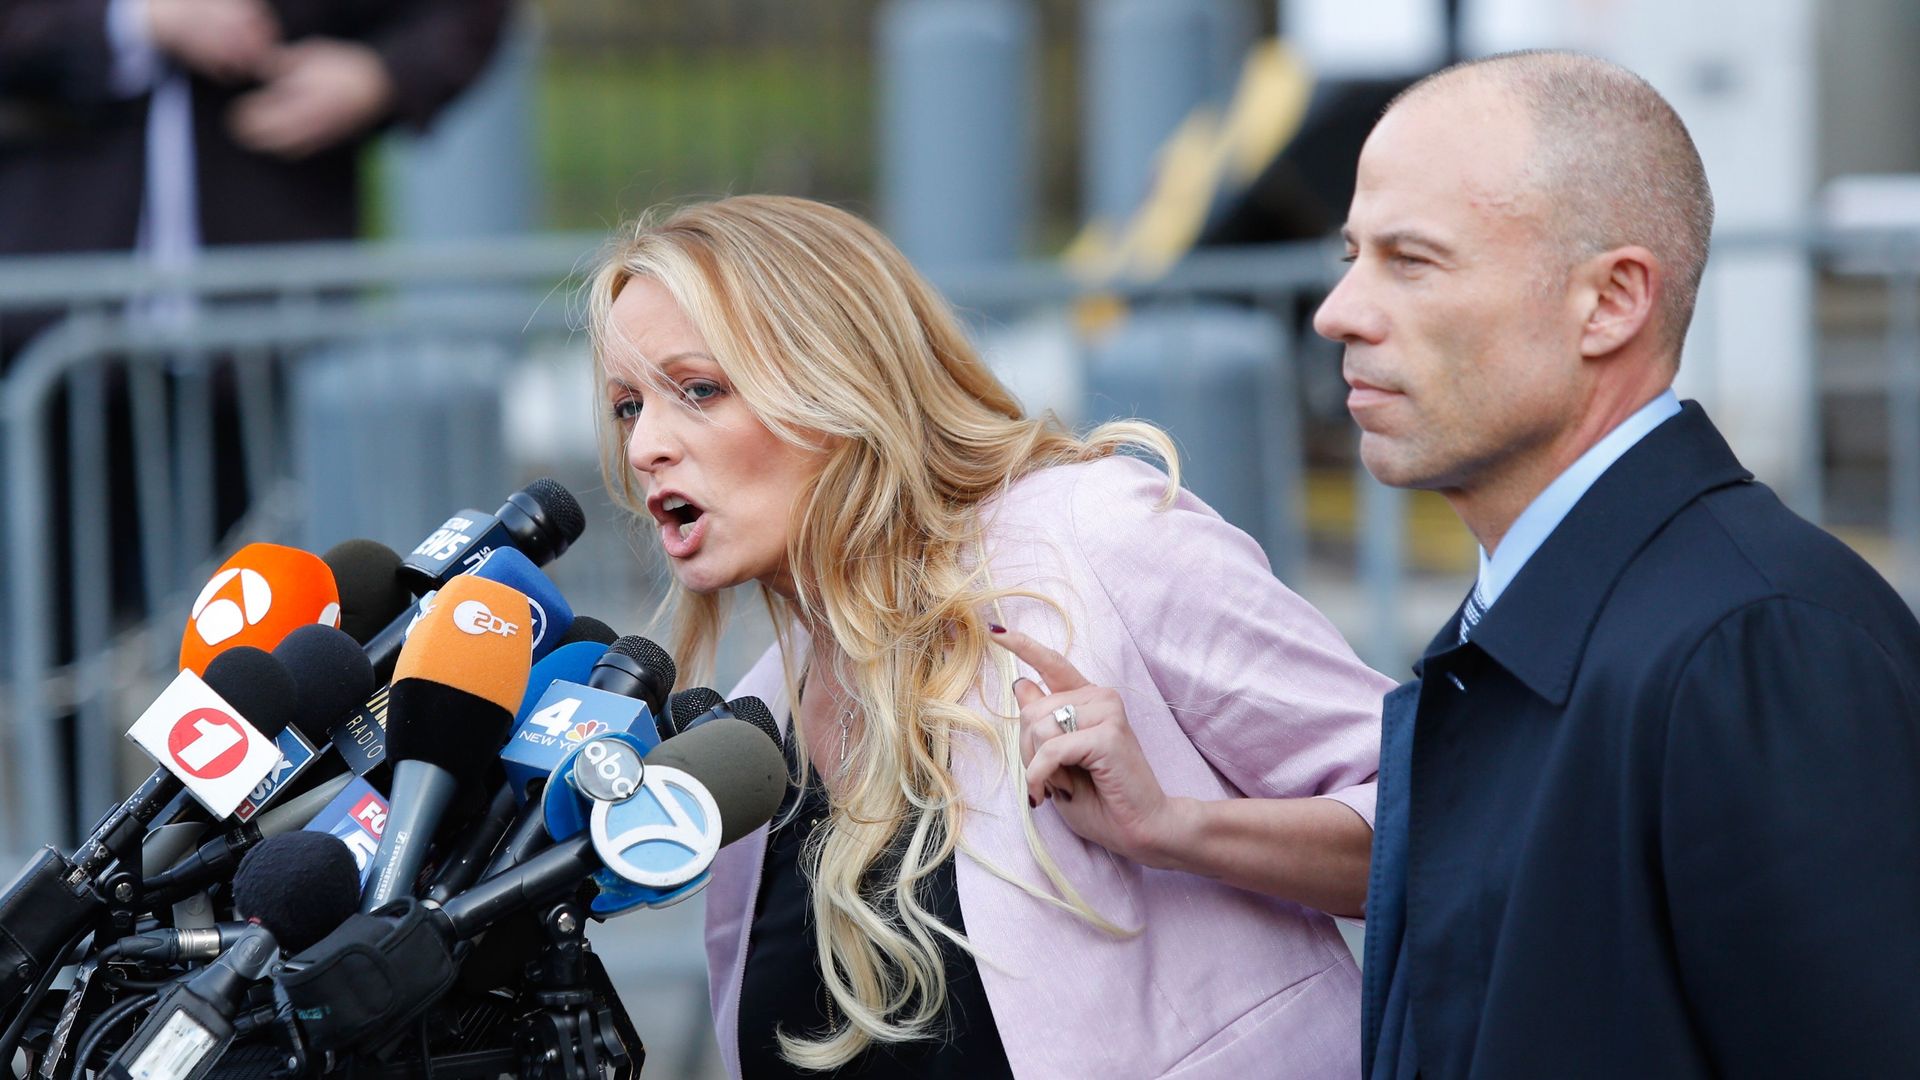 Adult-film actress Stephanie Clifford, also known as Stormy Daniels with her lawyer Michael Avenatti. 